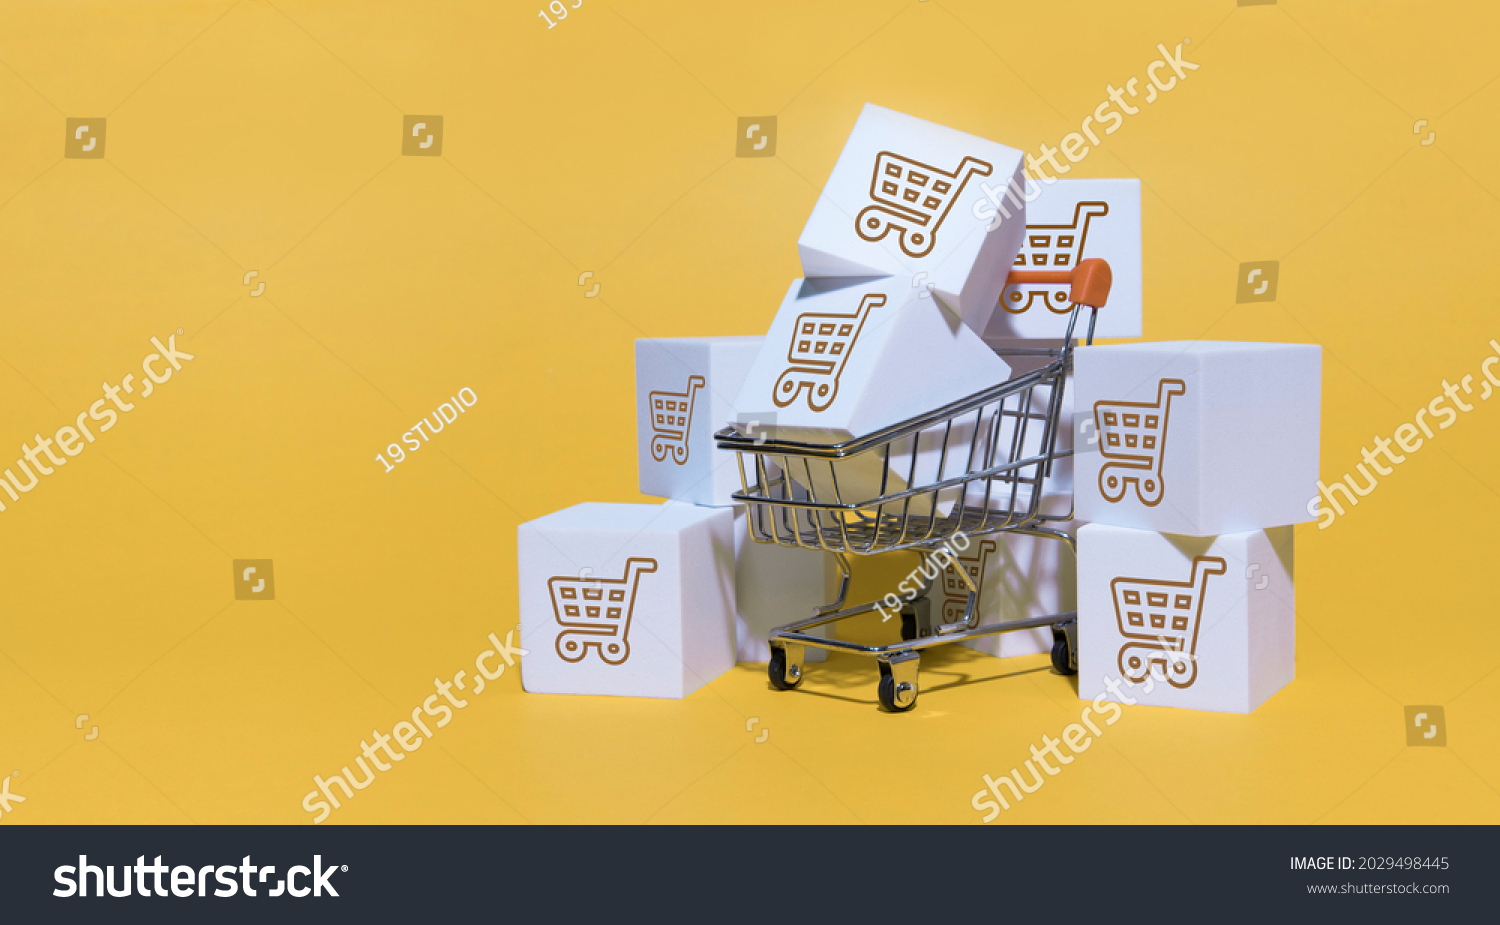 black friday concept, white box parcel on trolley on yellow background. shopping online and service home delivery.  #2029498445